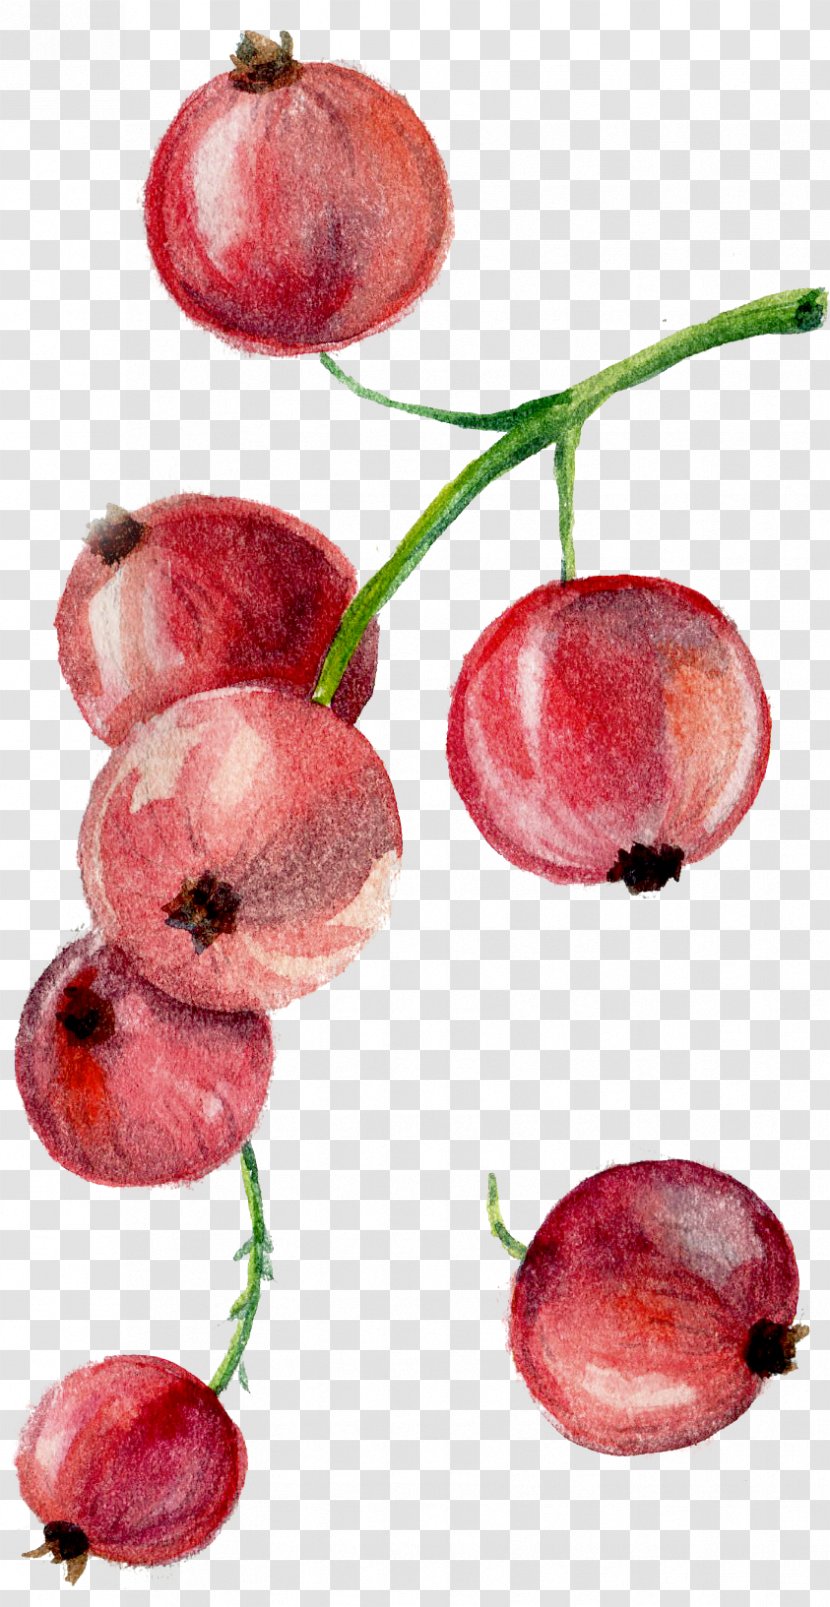 Drawing - Blueberry - Cherry Transparent PNG